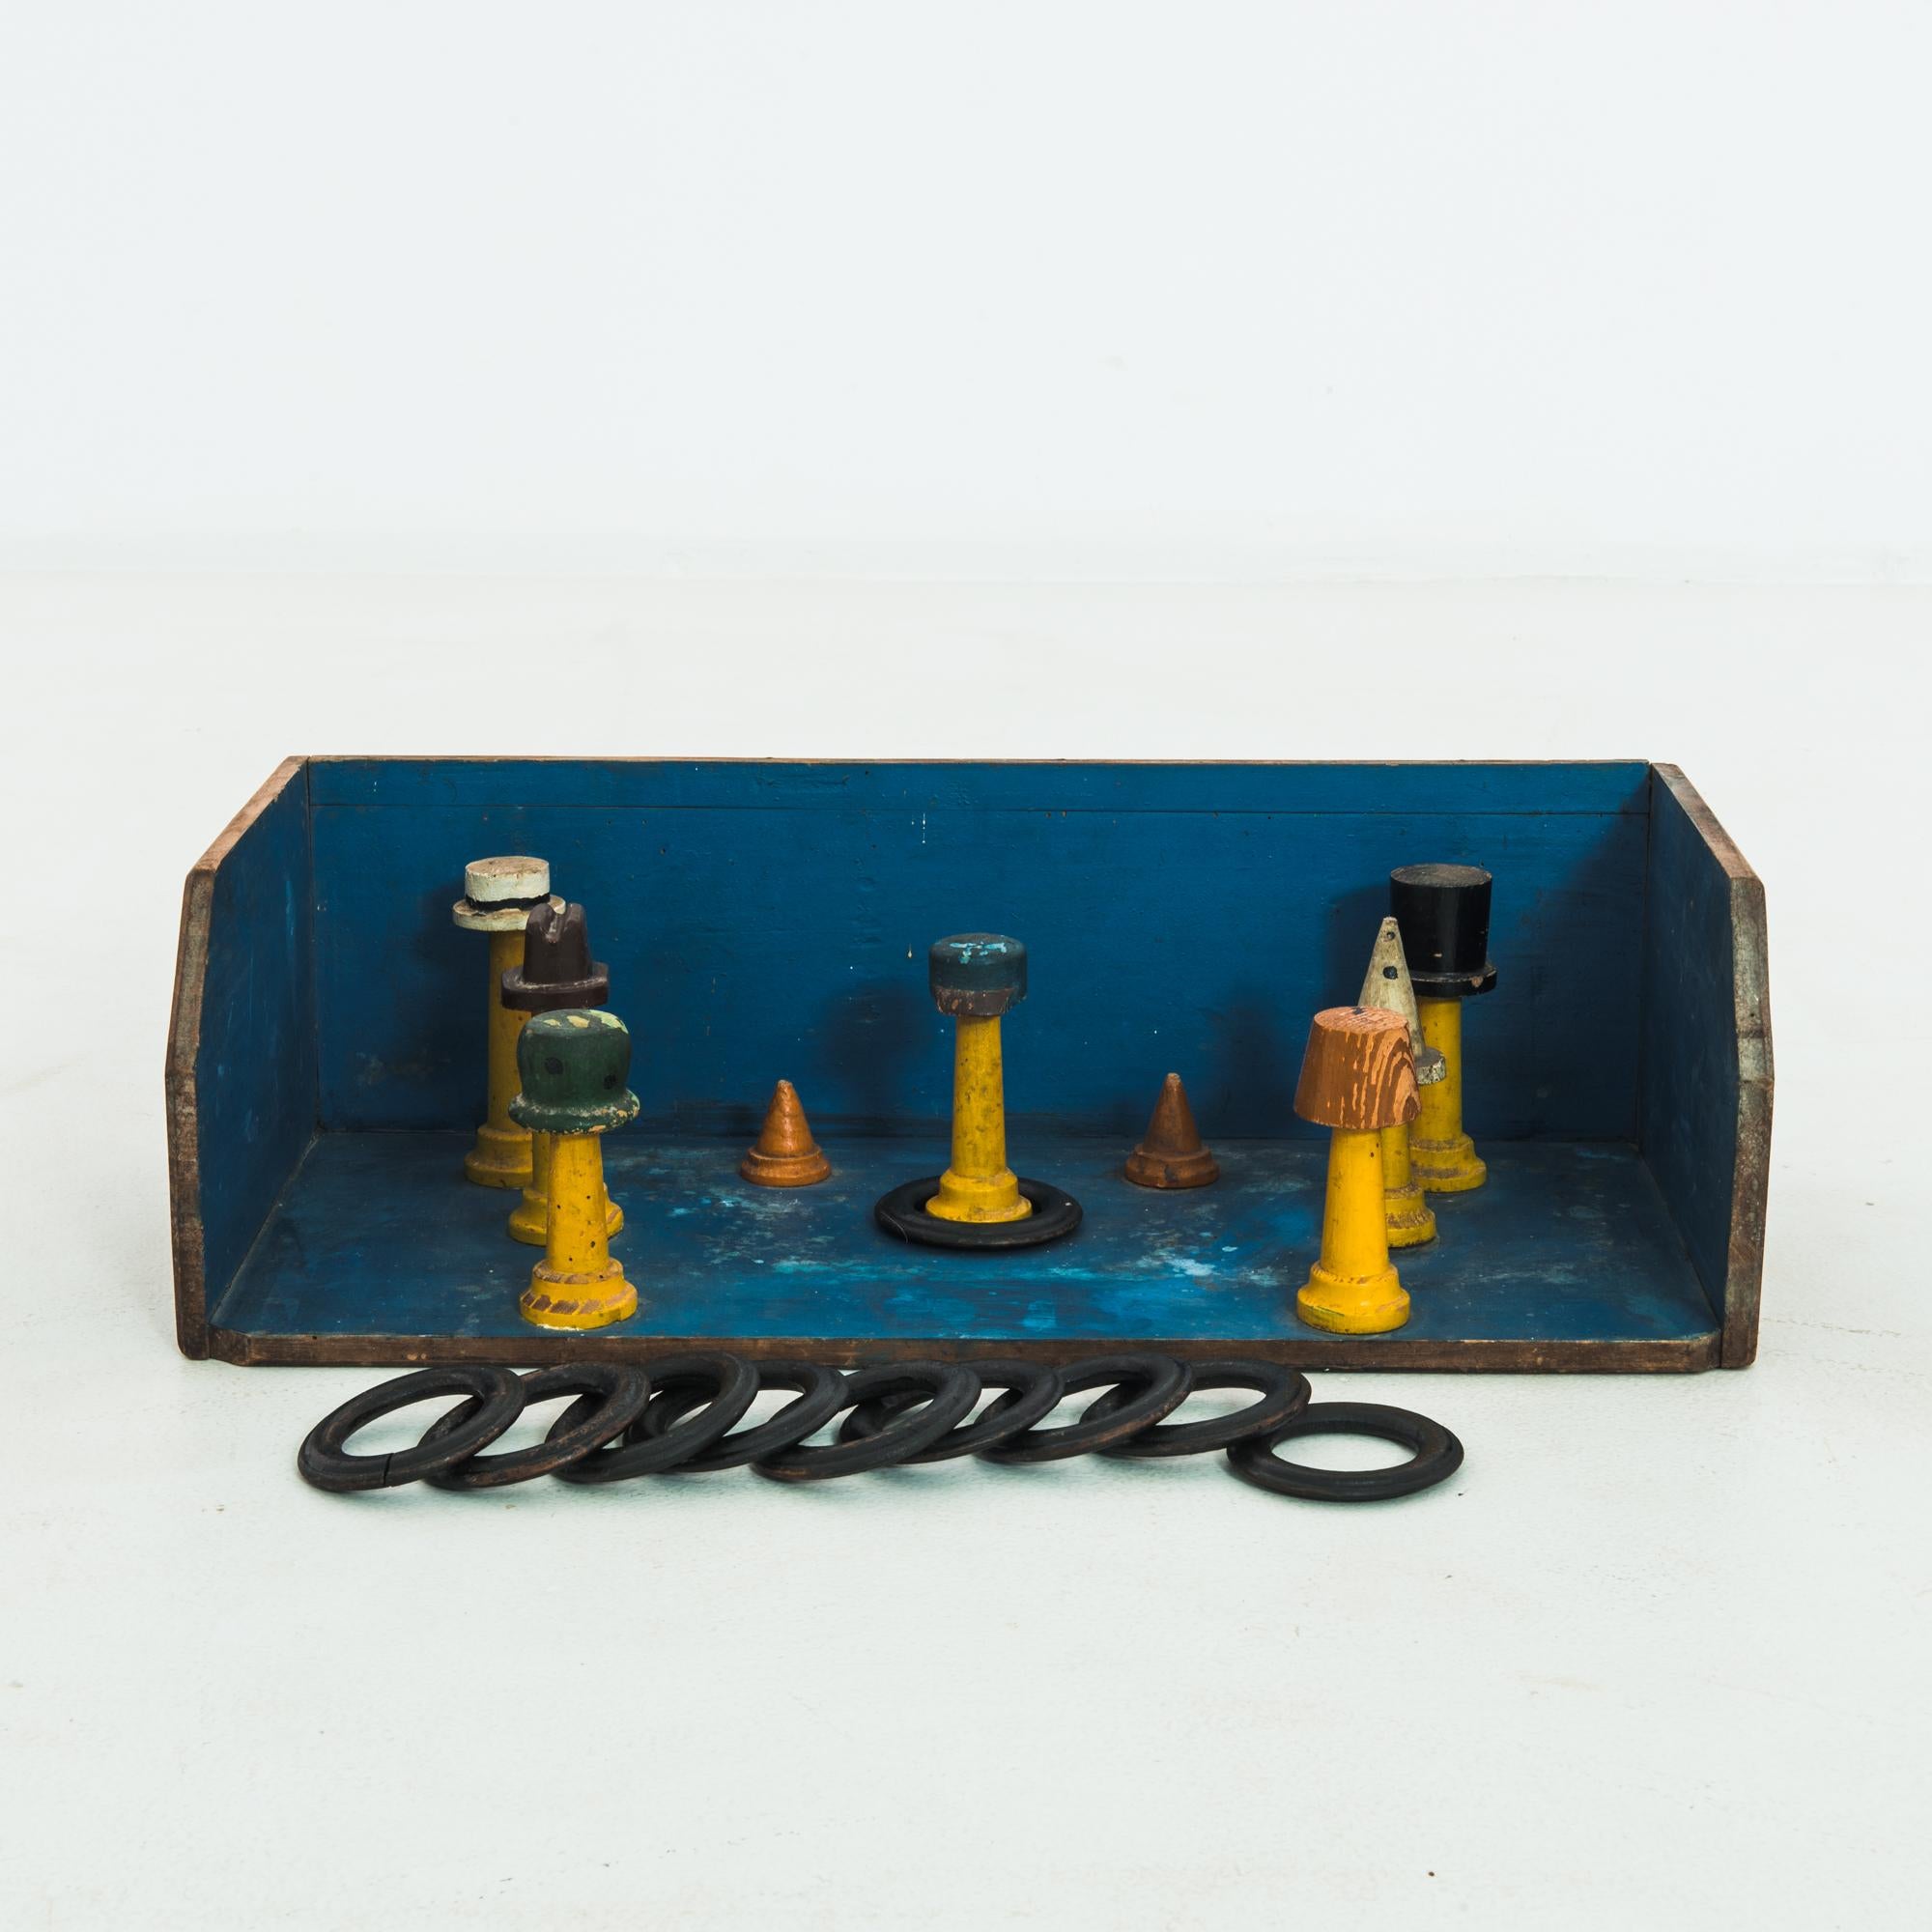 Made in Belgium, circa 1930, this wooden ring toss game will inject color and a whimsical spirit into any space. The yellow wooden posts are topped with caps of different shades and displayed against a blue backdrop. Ten black rings are included in